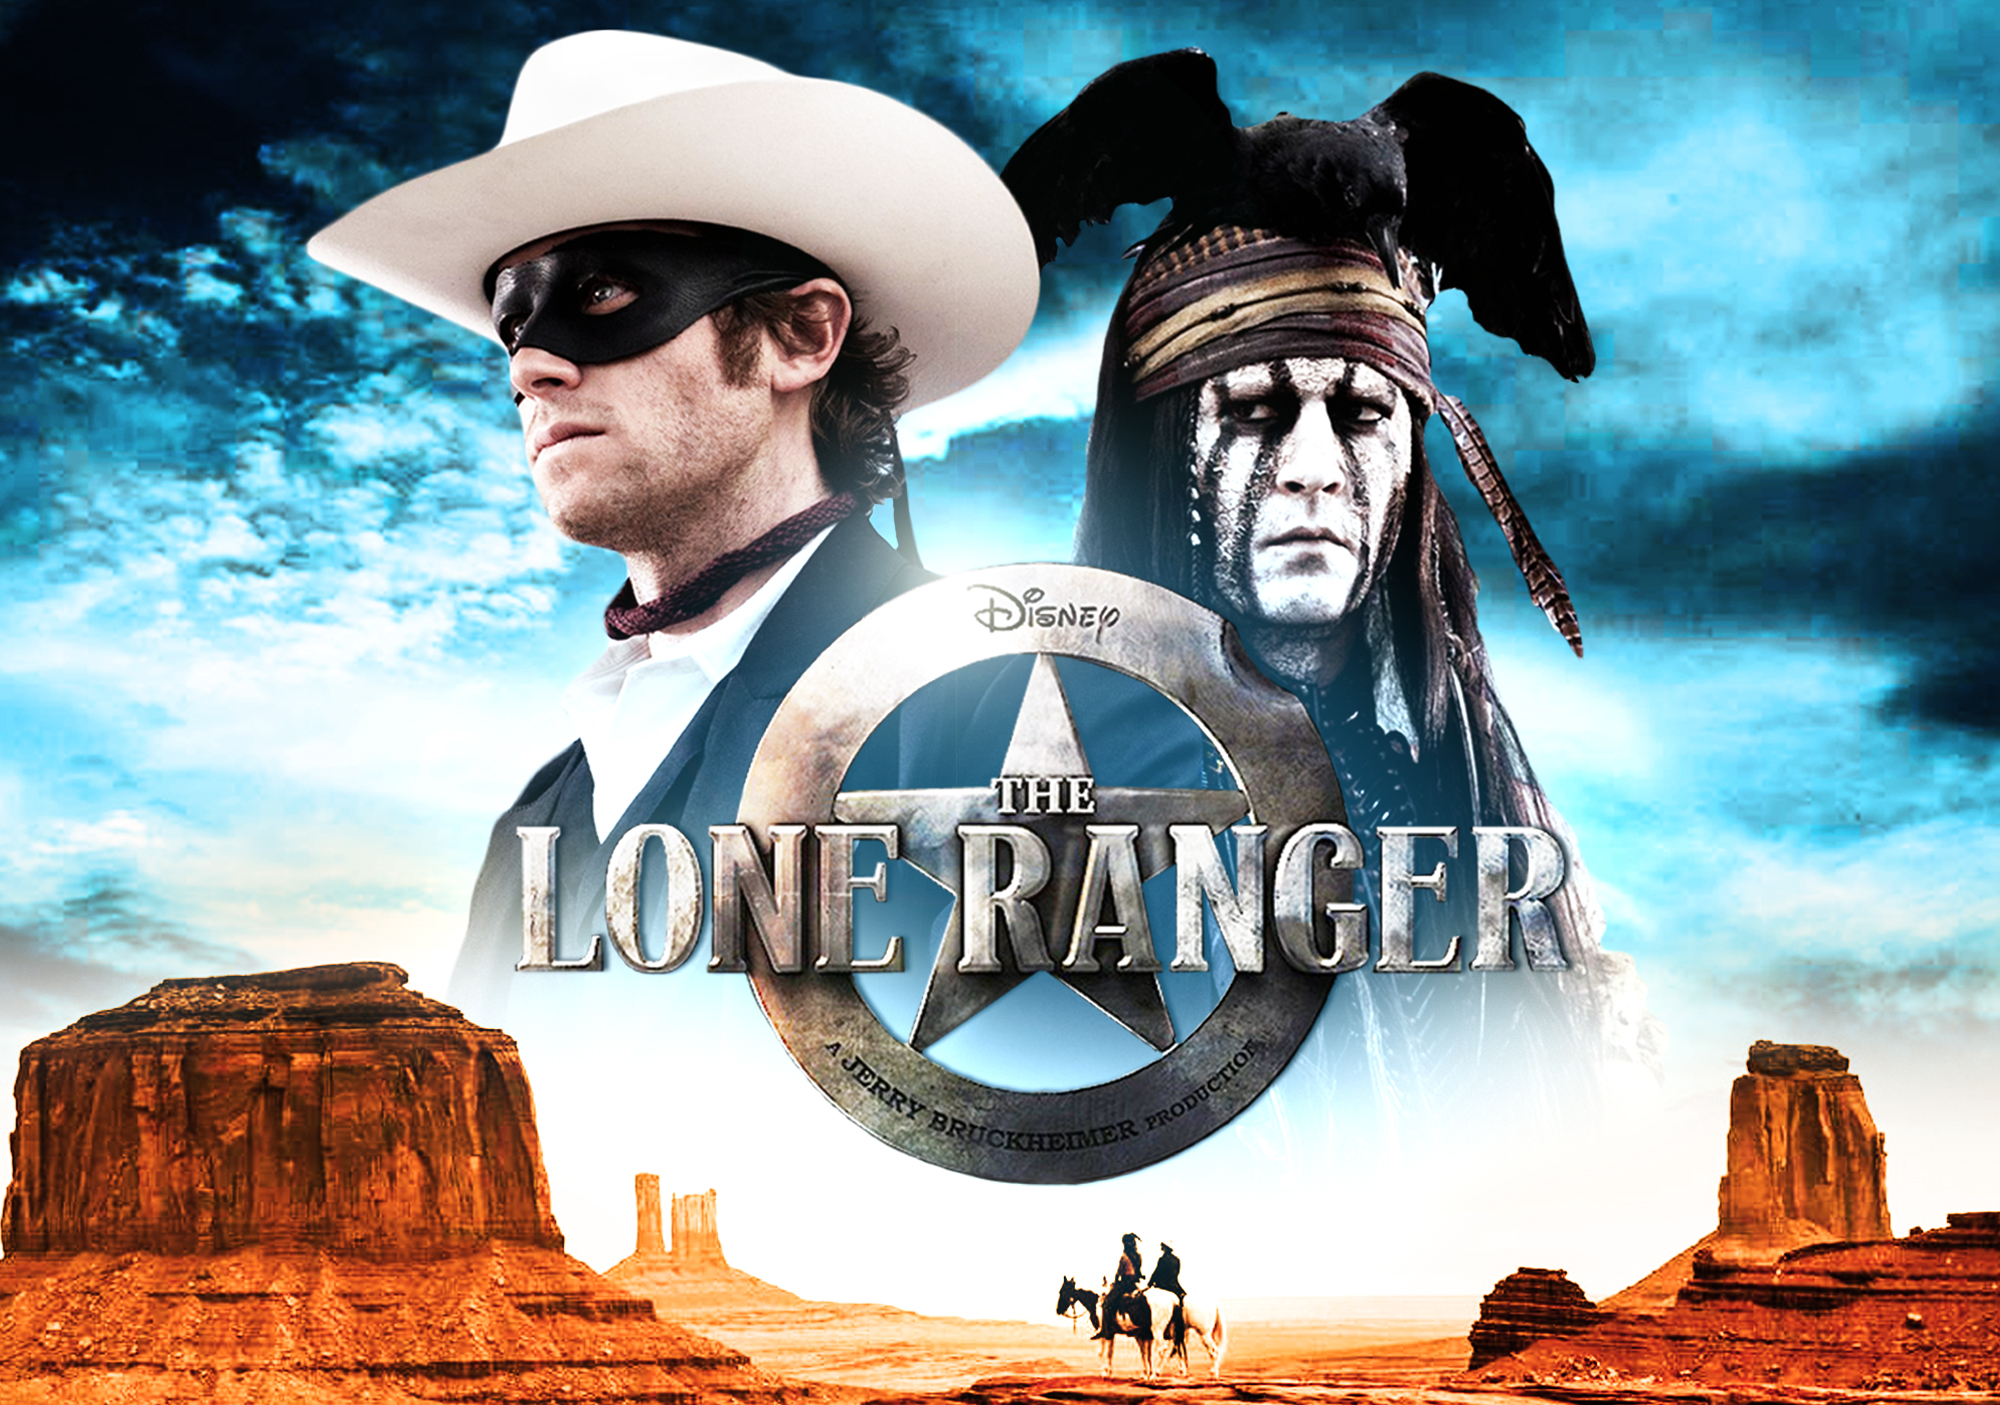 The Lone Ranger - iOS (iPhone, iPod touch, iPad)